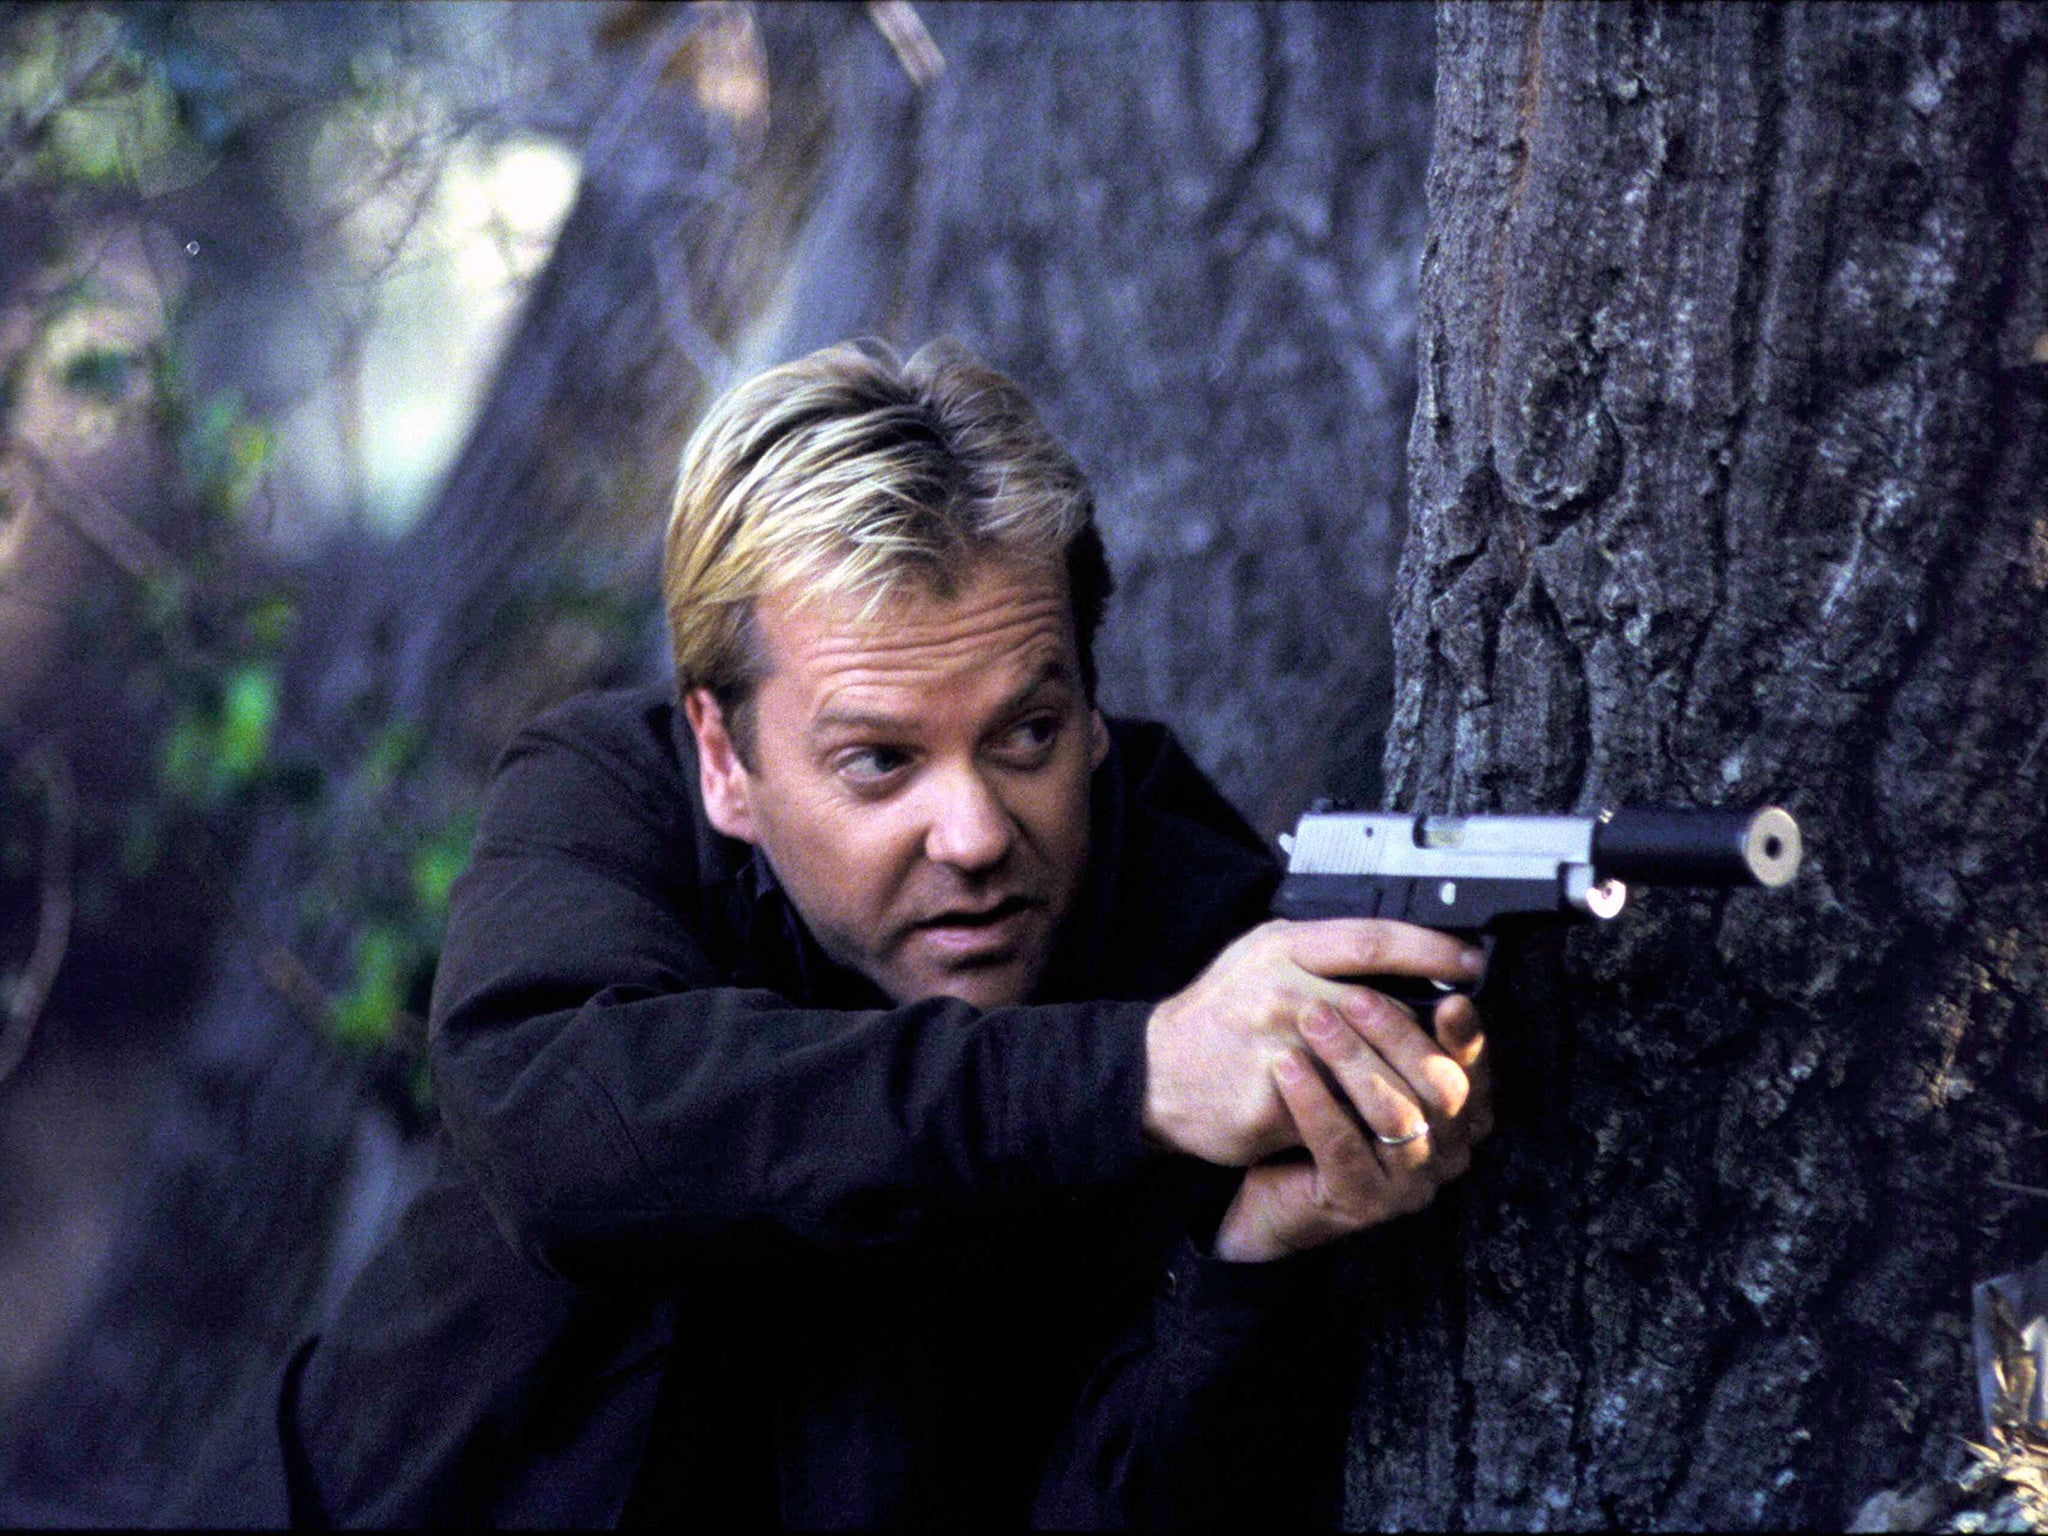 Kiefer Sutherland as Jack Bauer in the long-running ‘24'